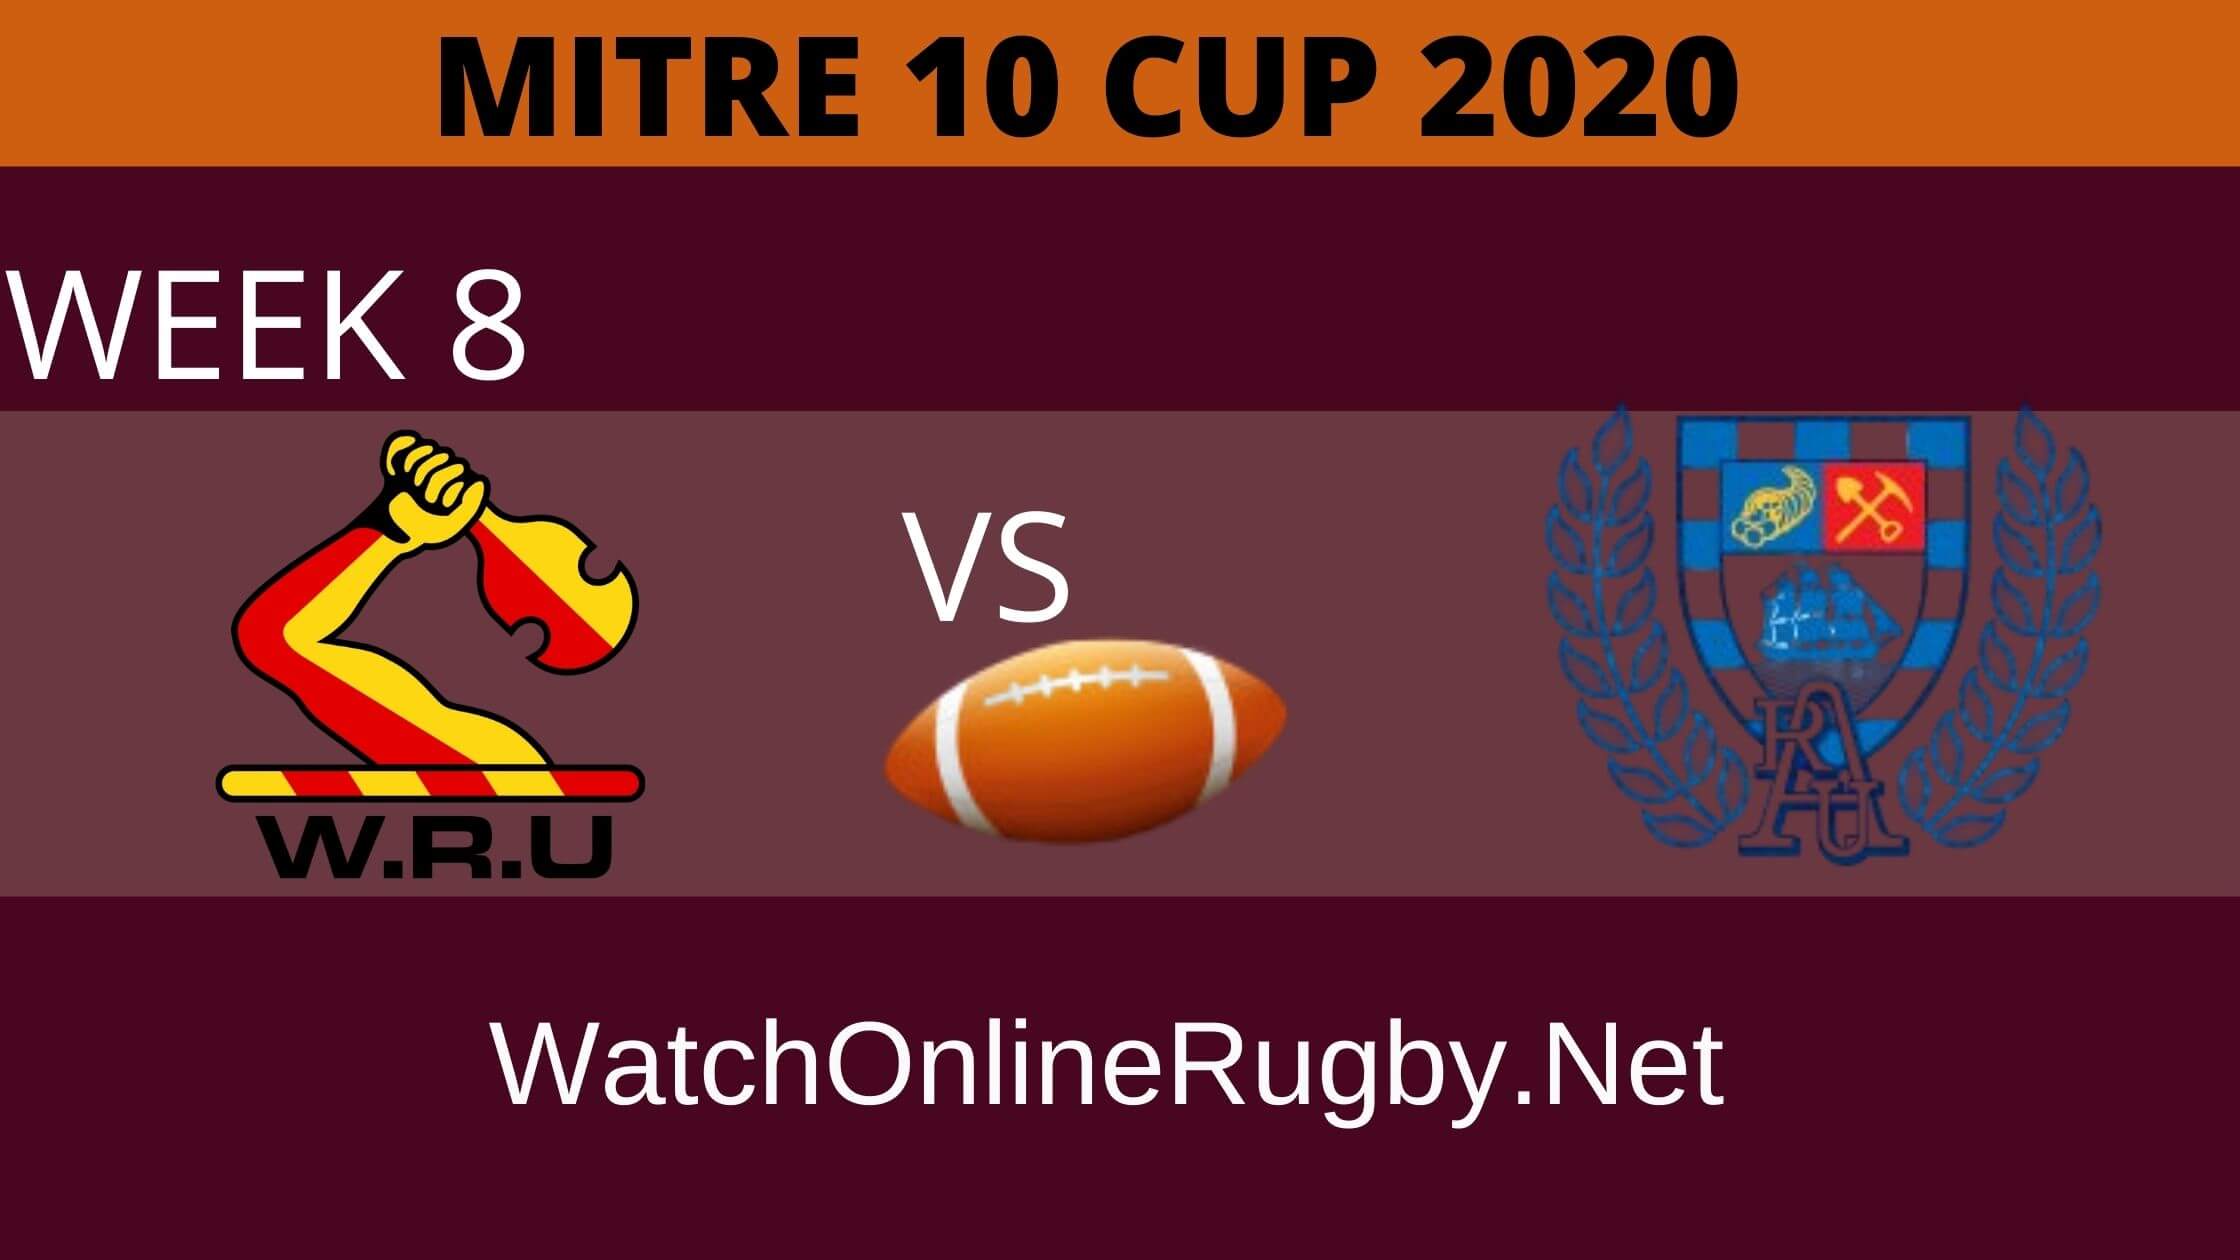 Auckland Vs Waikato Mitre 10 Cup 2020 Week 8